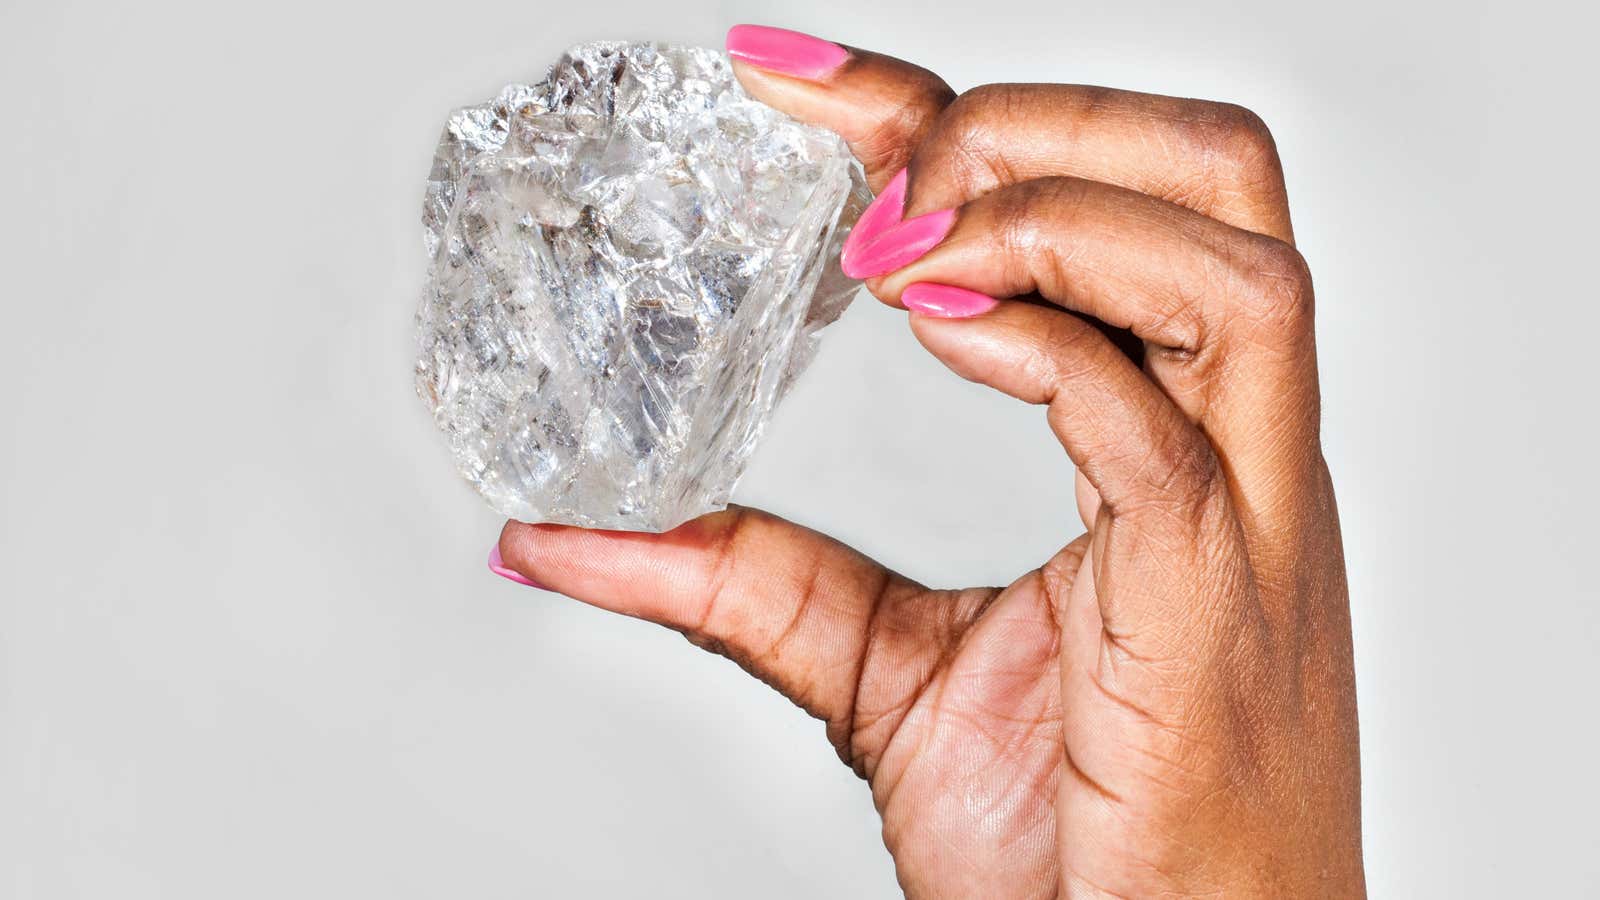 A sparkling recovery for the diamond industry.